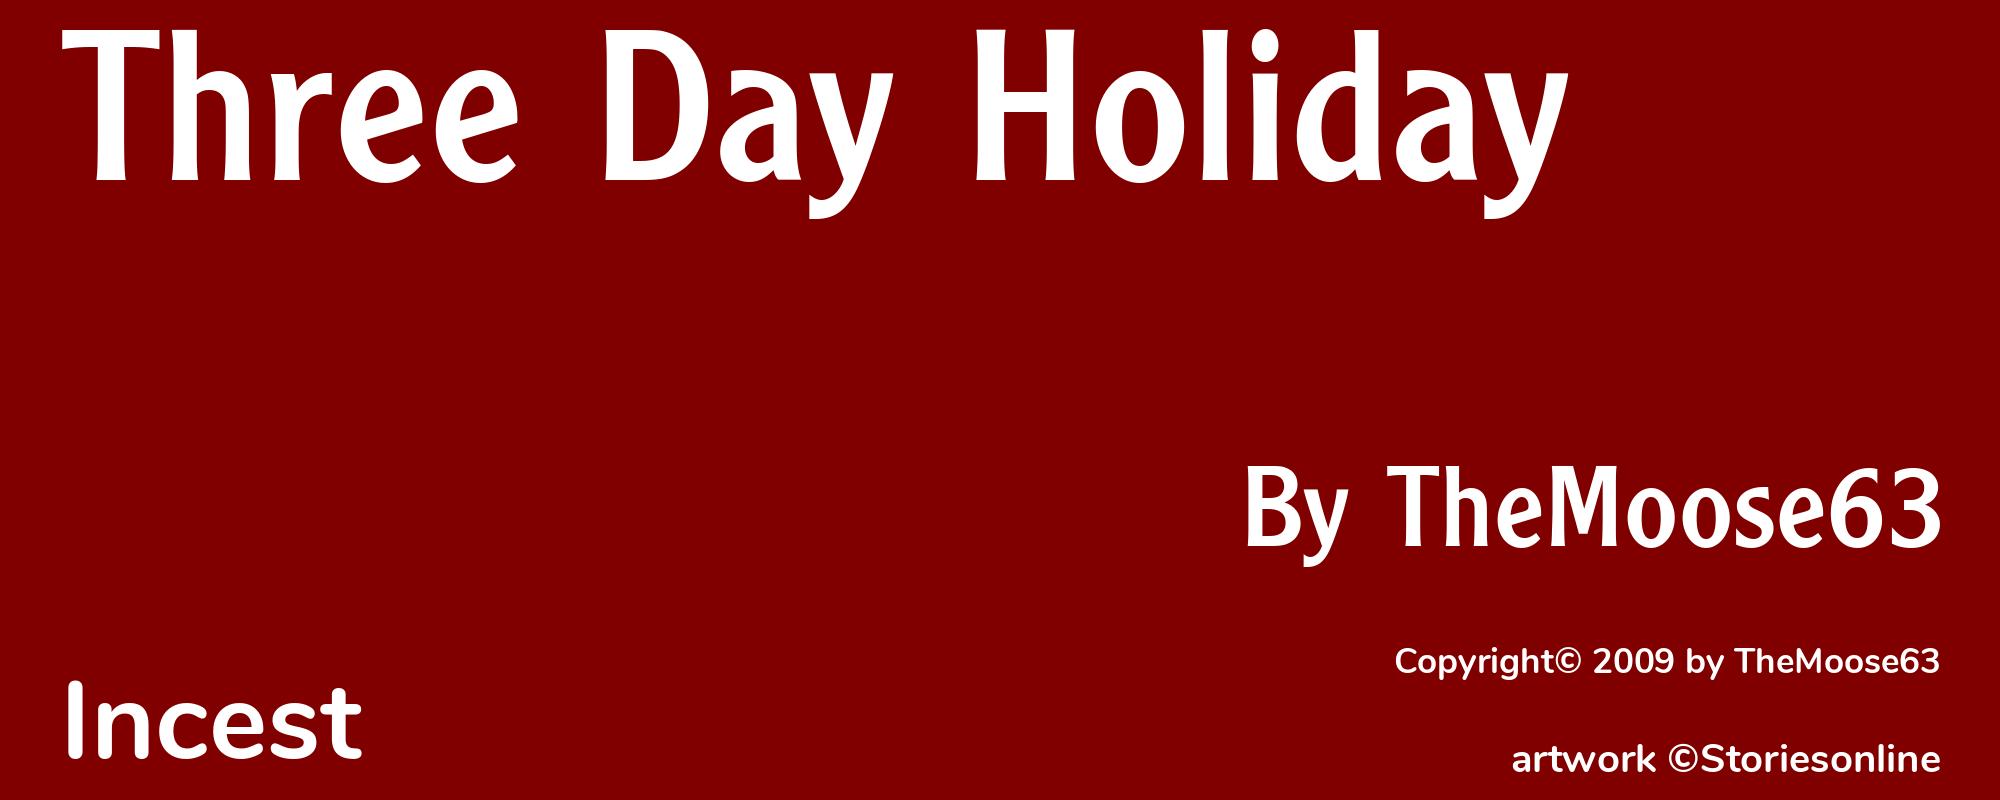 Three Day Holiday - Cover